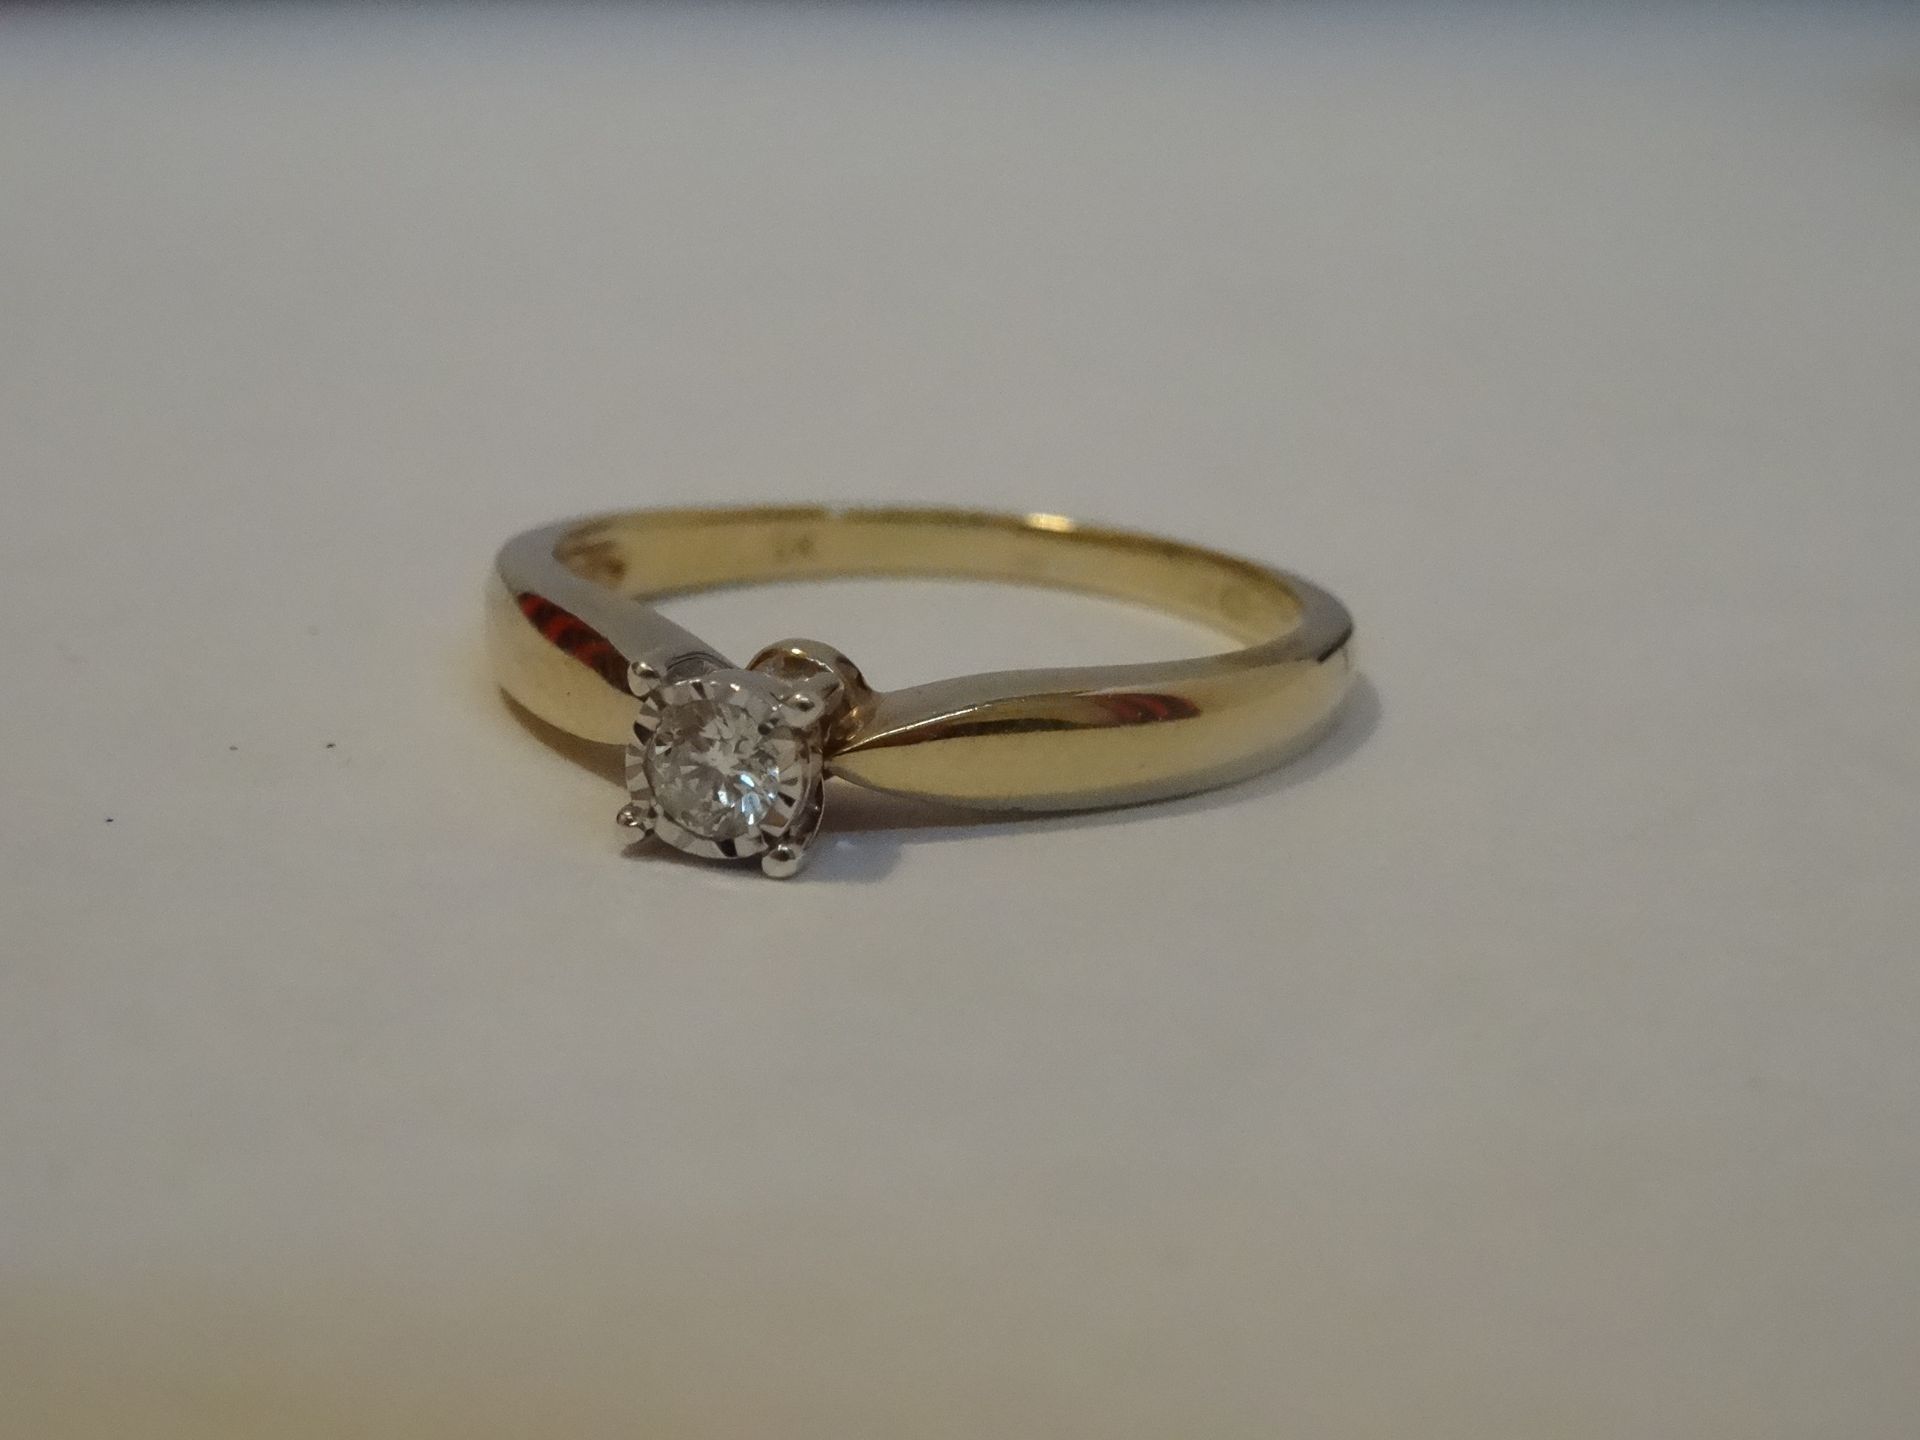 9 Carat Yellow & White Gold Single Stone Diamond Solitaire Ring. Total Piece Weigh 2.18 Grams